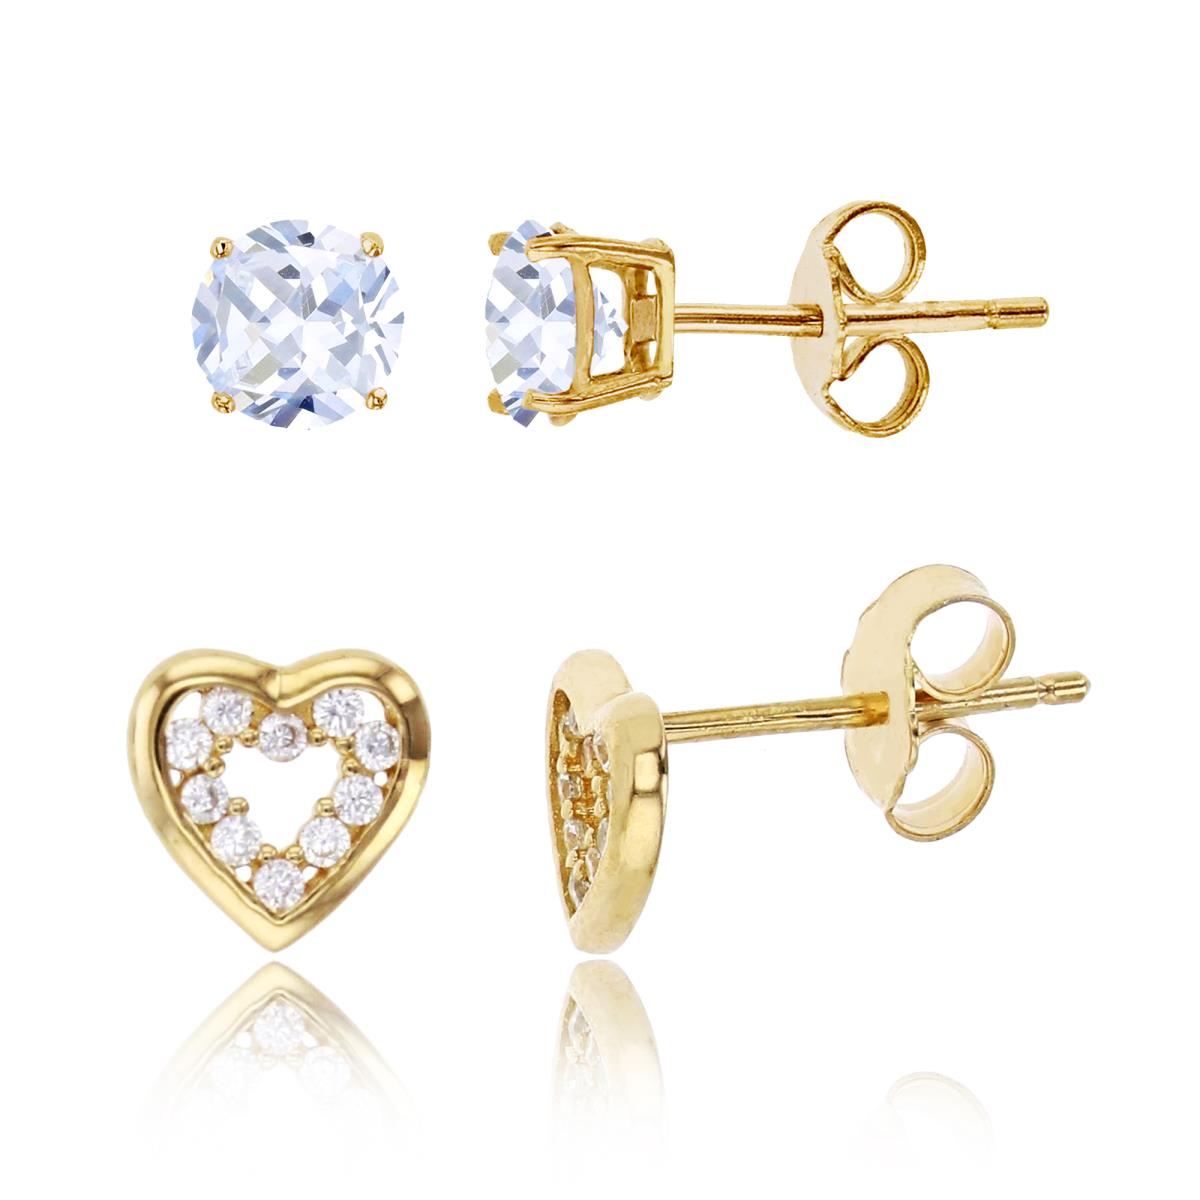 Sterling Silver Yellow 7x7mm Open Heart & 4mm Round Solitaire Stud Earring Set